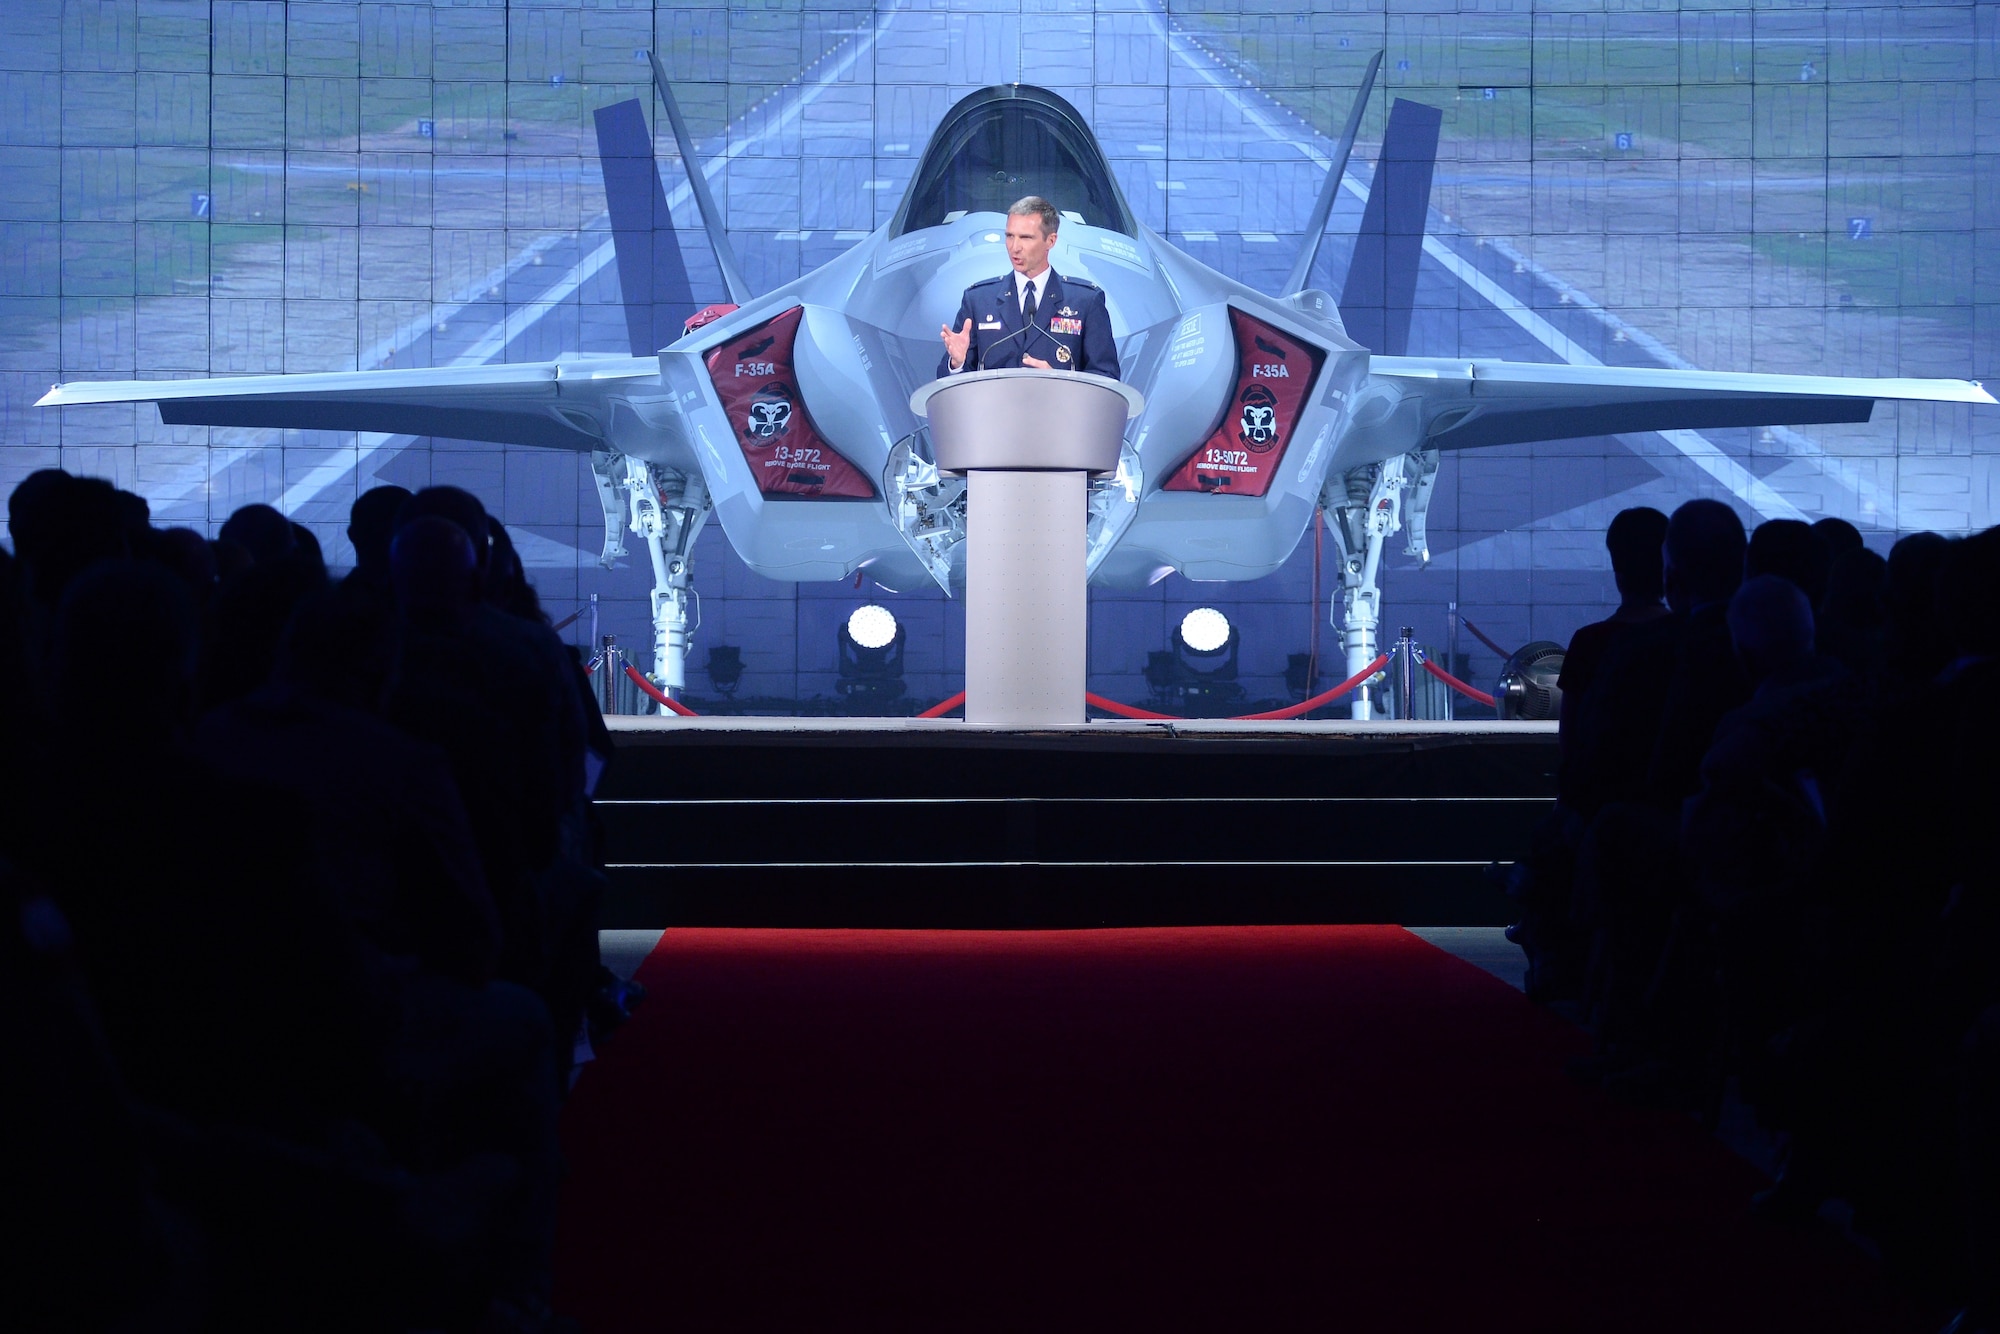 Col. Bryan Radliff, 419th Fighter Wing commander, makes closing remarks during an F-35A Lightning II aircraft unveiling ceremony Oct. 14 at Hill Air Force Base, Utah. The ceremony marked the formal beginning of F-35 operations at Hill, and commemorated the arrival of the first combat-coded F-35 aircraft at the base. Hill will receive a total of 72 F-35s on a staggered basis through 2019.  The jets will be flown and maintained by Hill Airmen assigned to the active-duty 388th Fighter Wing and its Reserve component 419th Fighter Wing. (U.S. Air Force photo by R. Nial Bradshaw /Released)